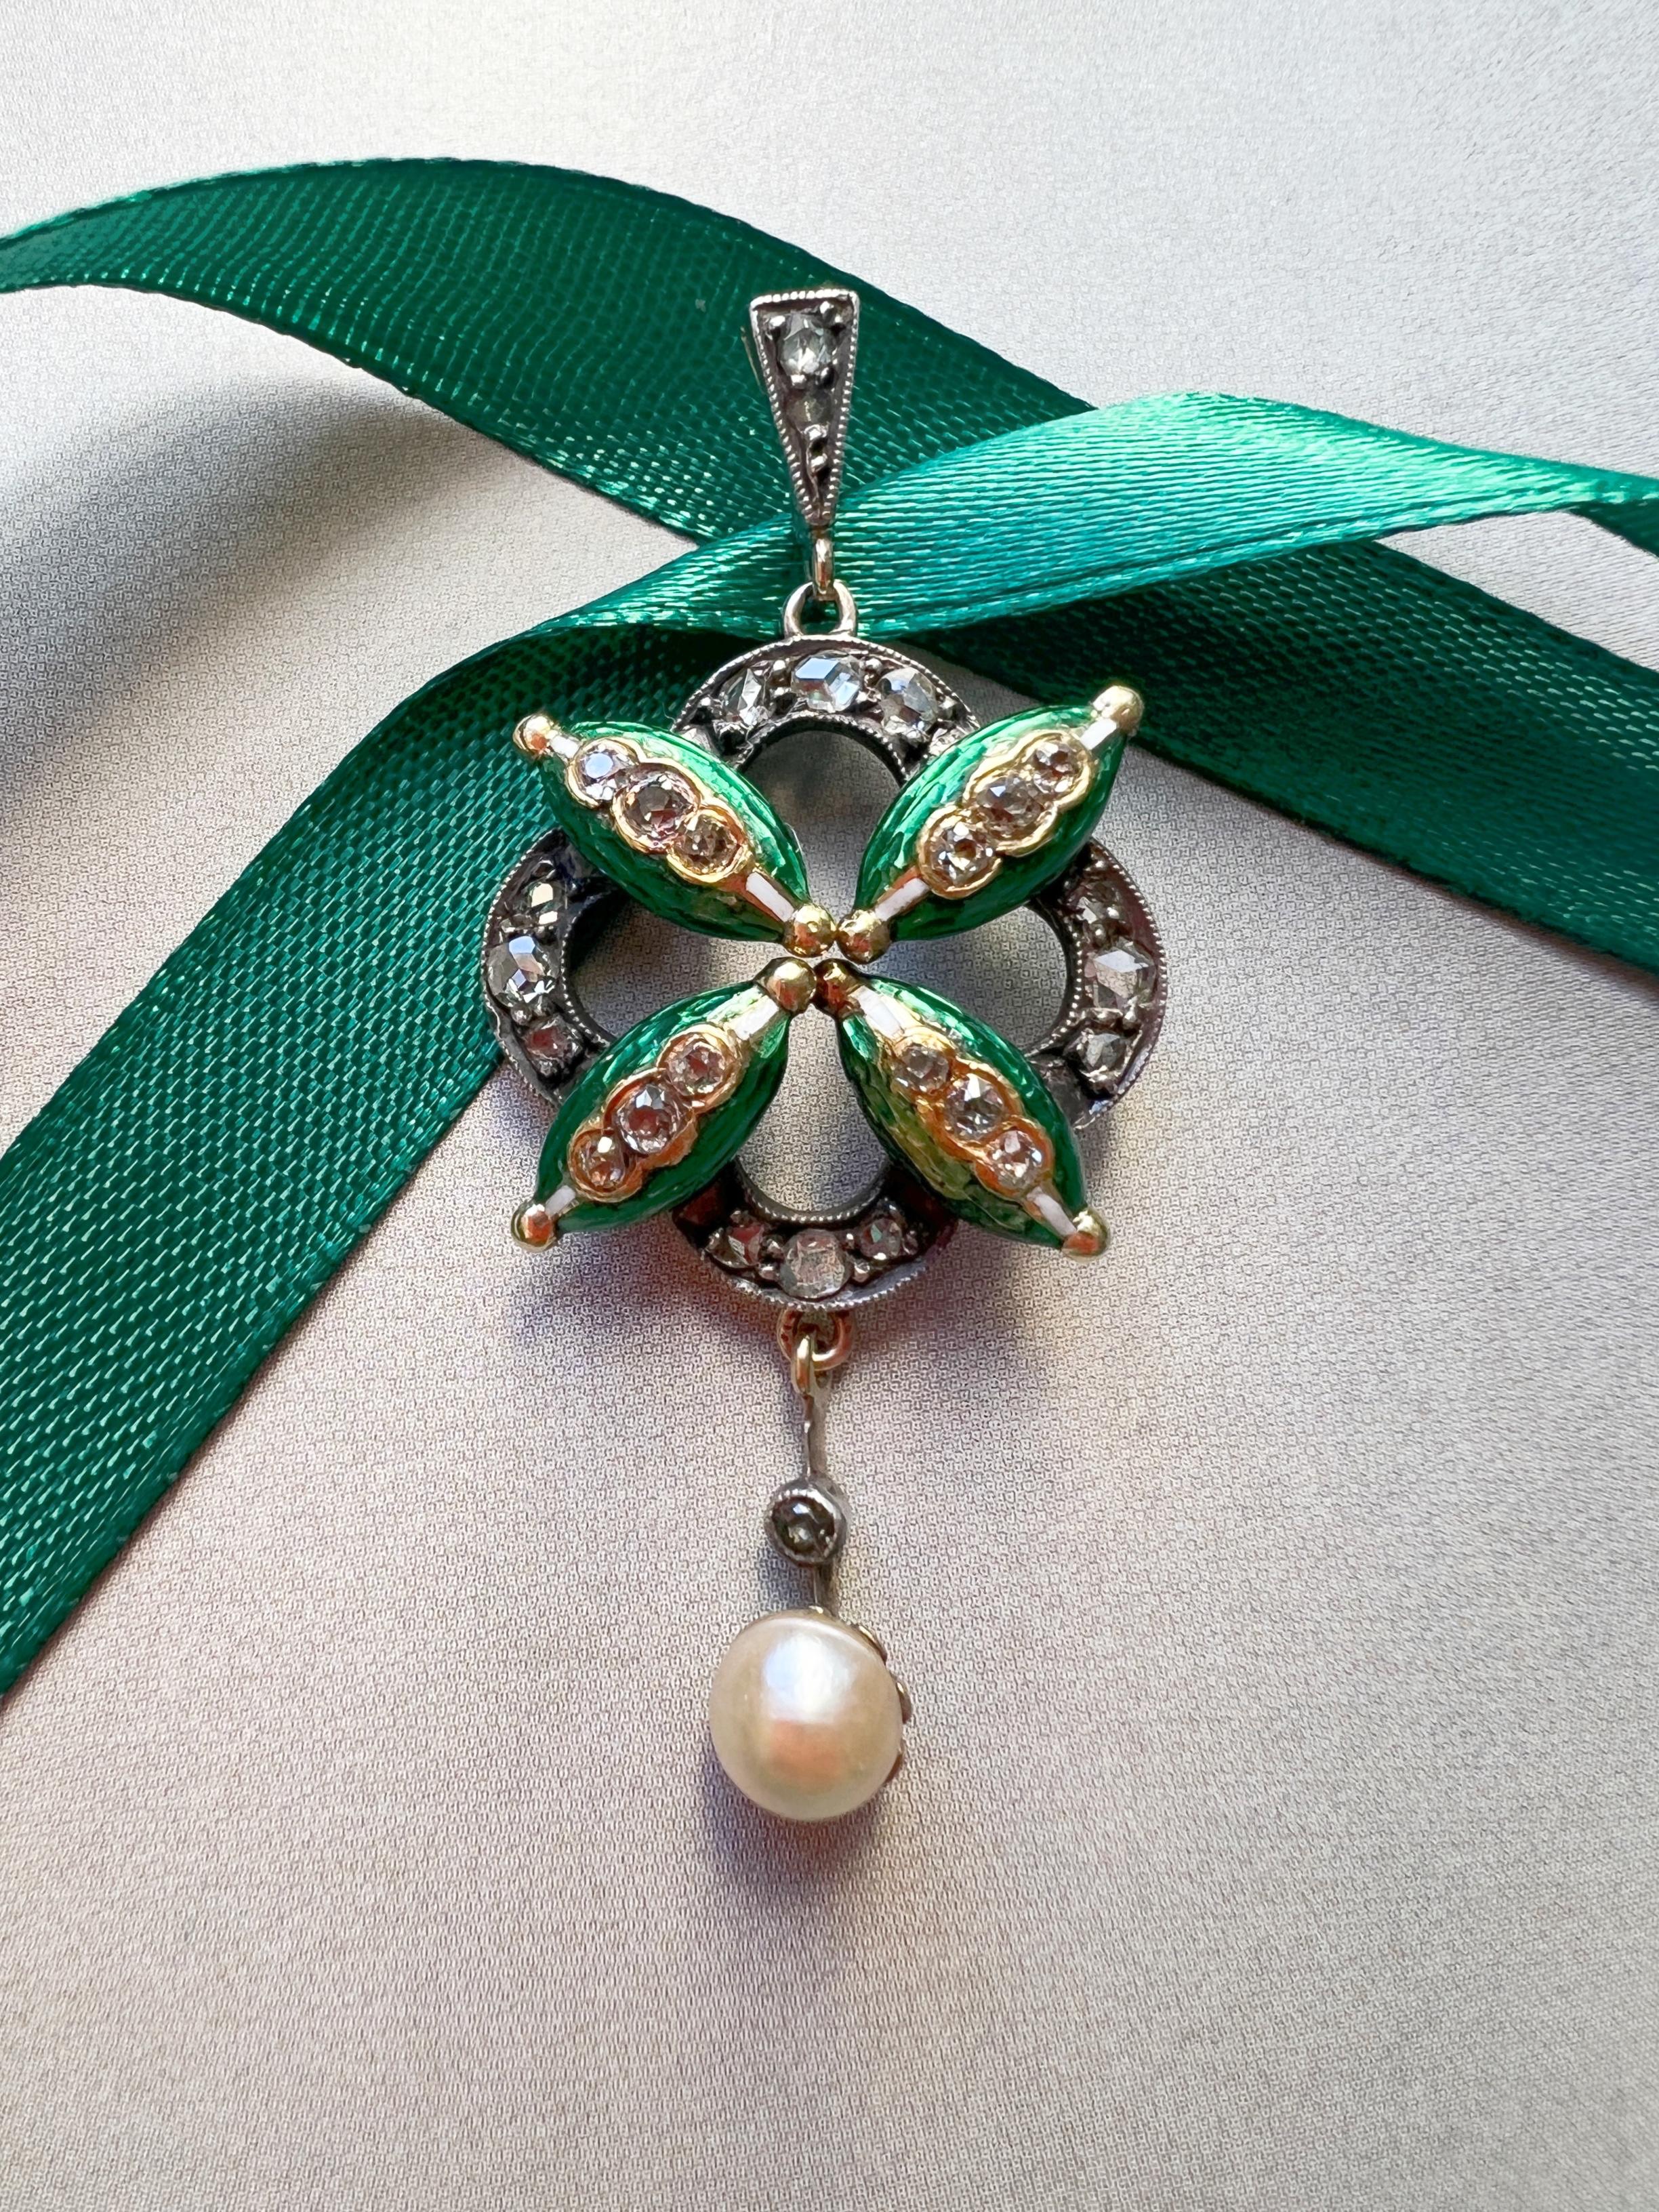 For sale a delicate diamond and pearl pendant, featuring a beautiful floral design. The pendant is dated back to the mid 19th century, circa 1850s, the Victorian era.

The four leaves in the center are decorated with 12 diamonds in rose cut style.